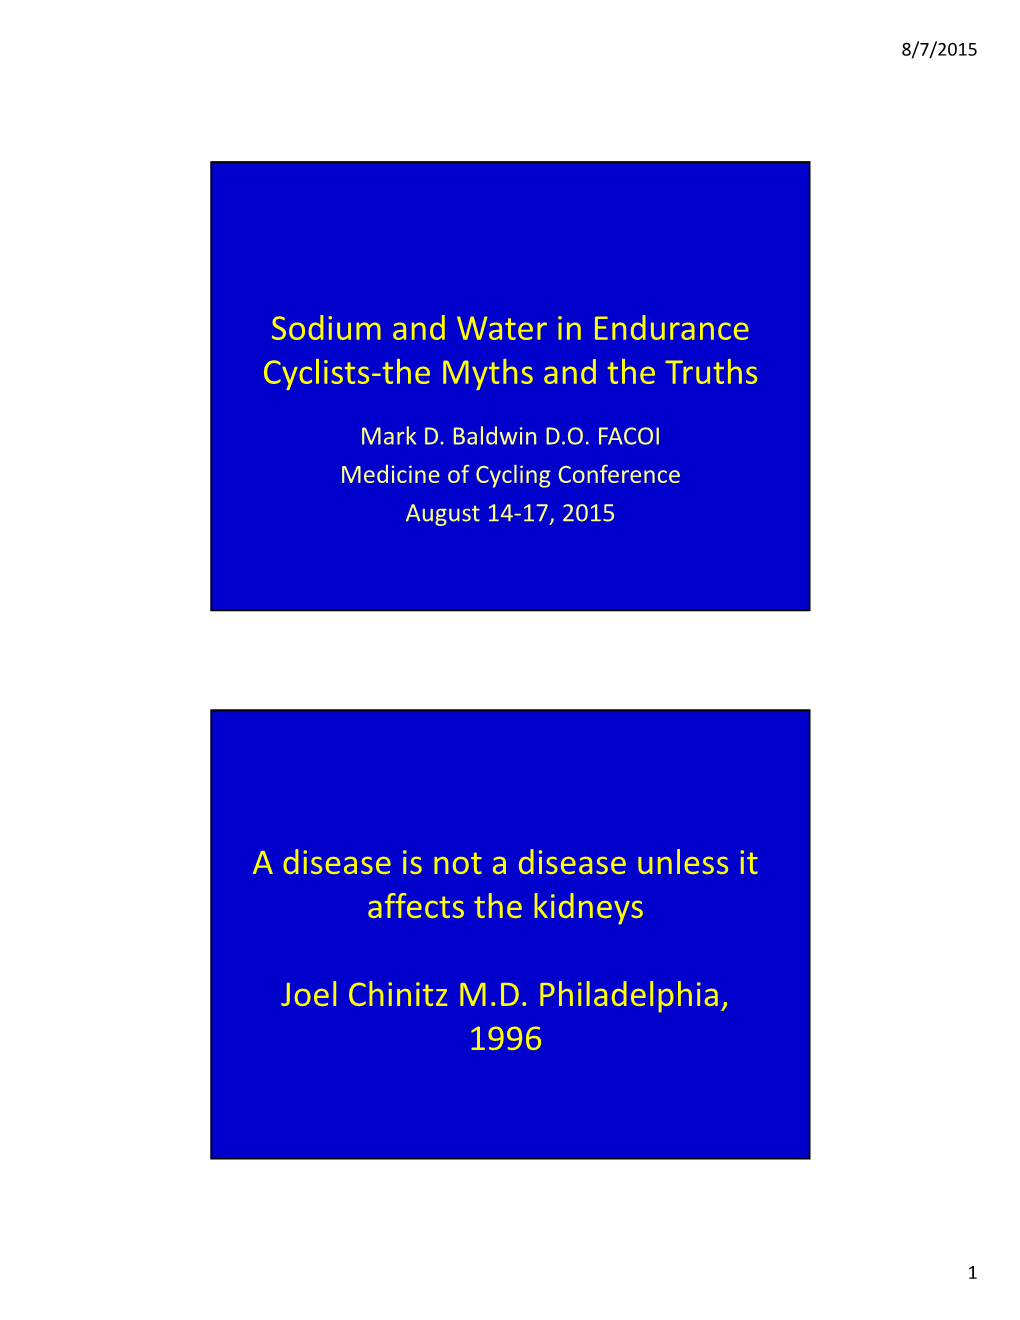 Sodium and Water in Endurance Cyclists-The Myths and the Truths